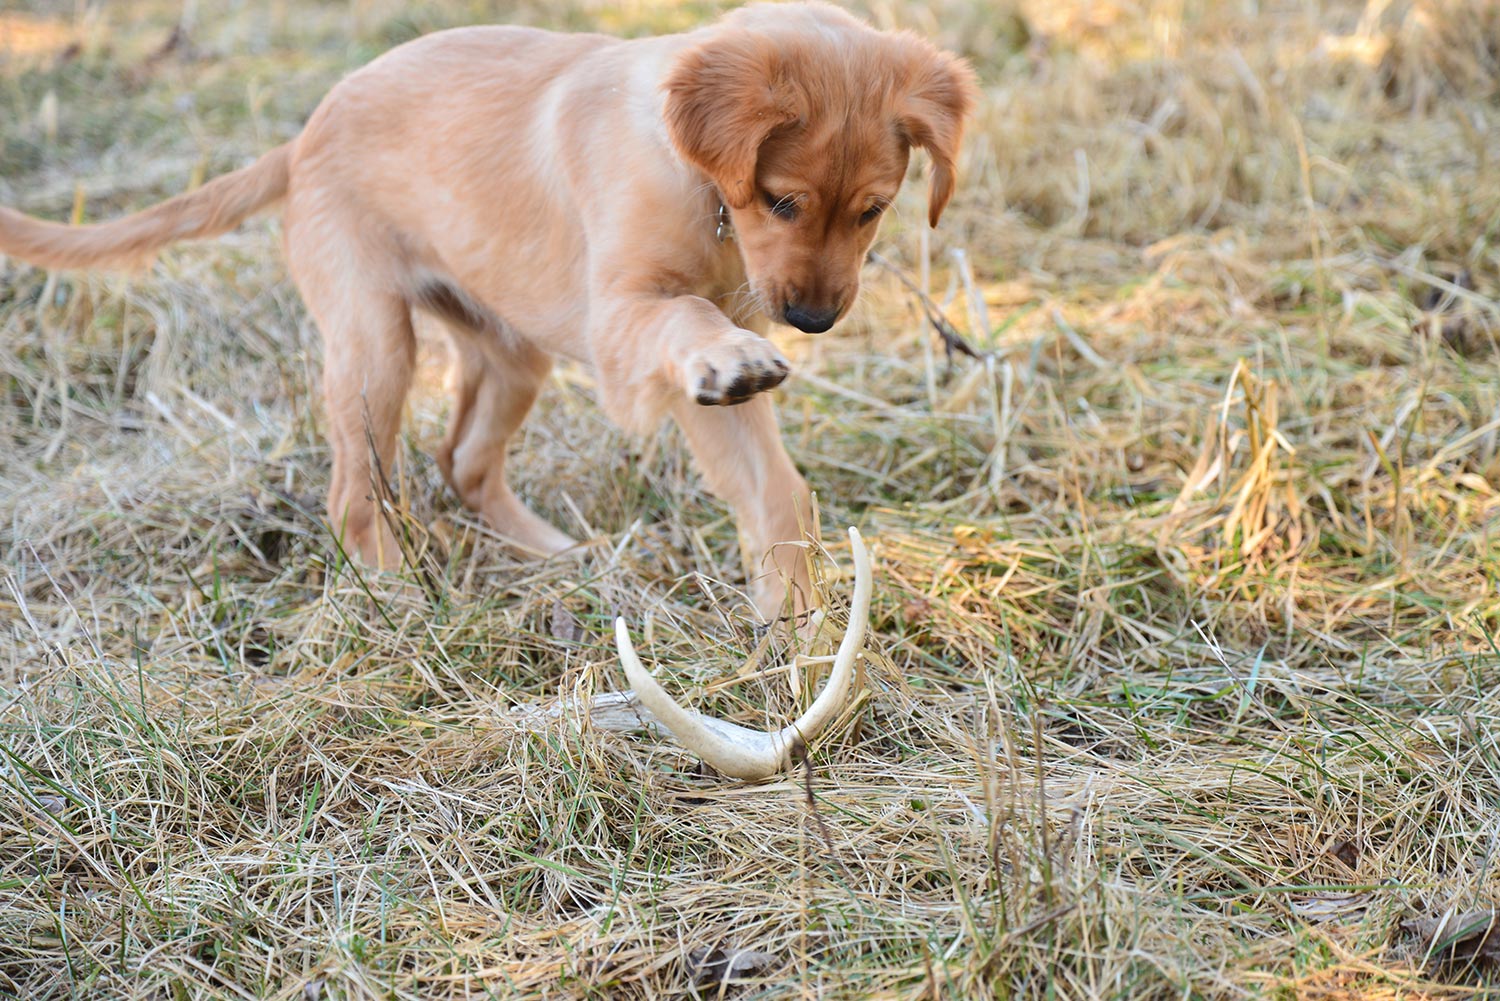 Young hunting dog playing with deer antler.